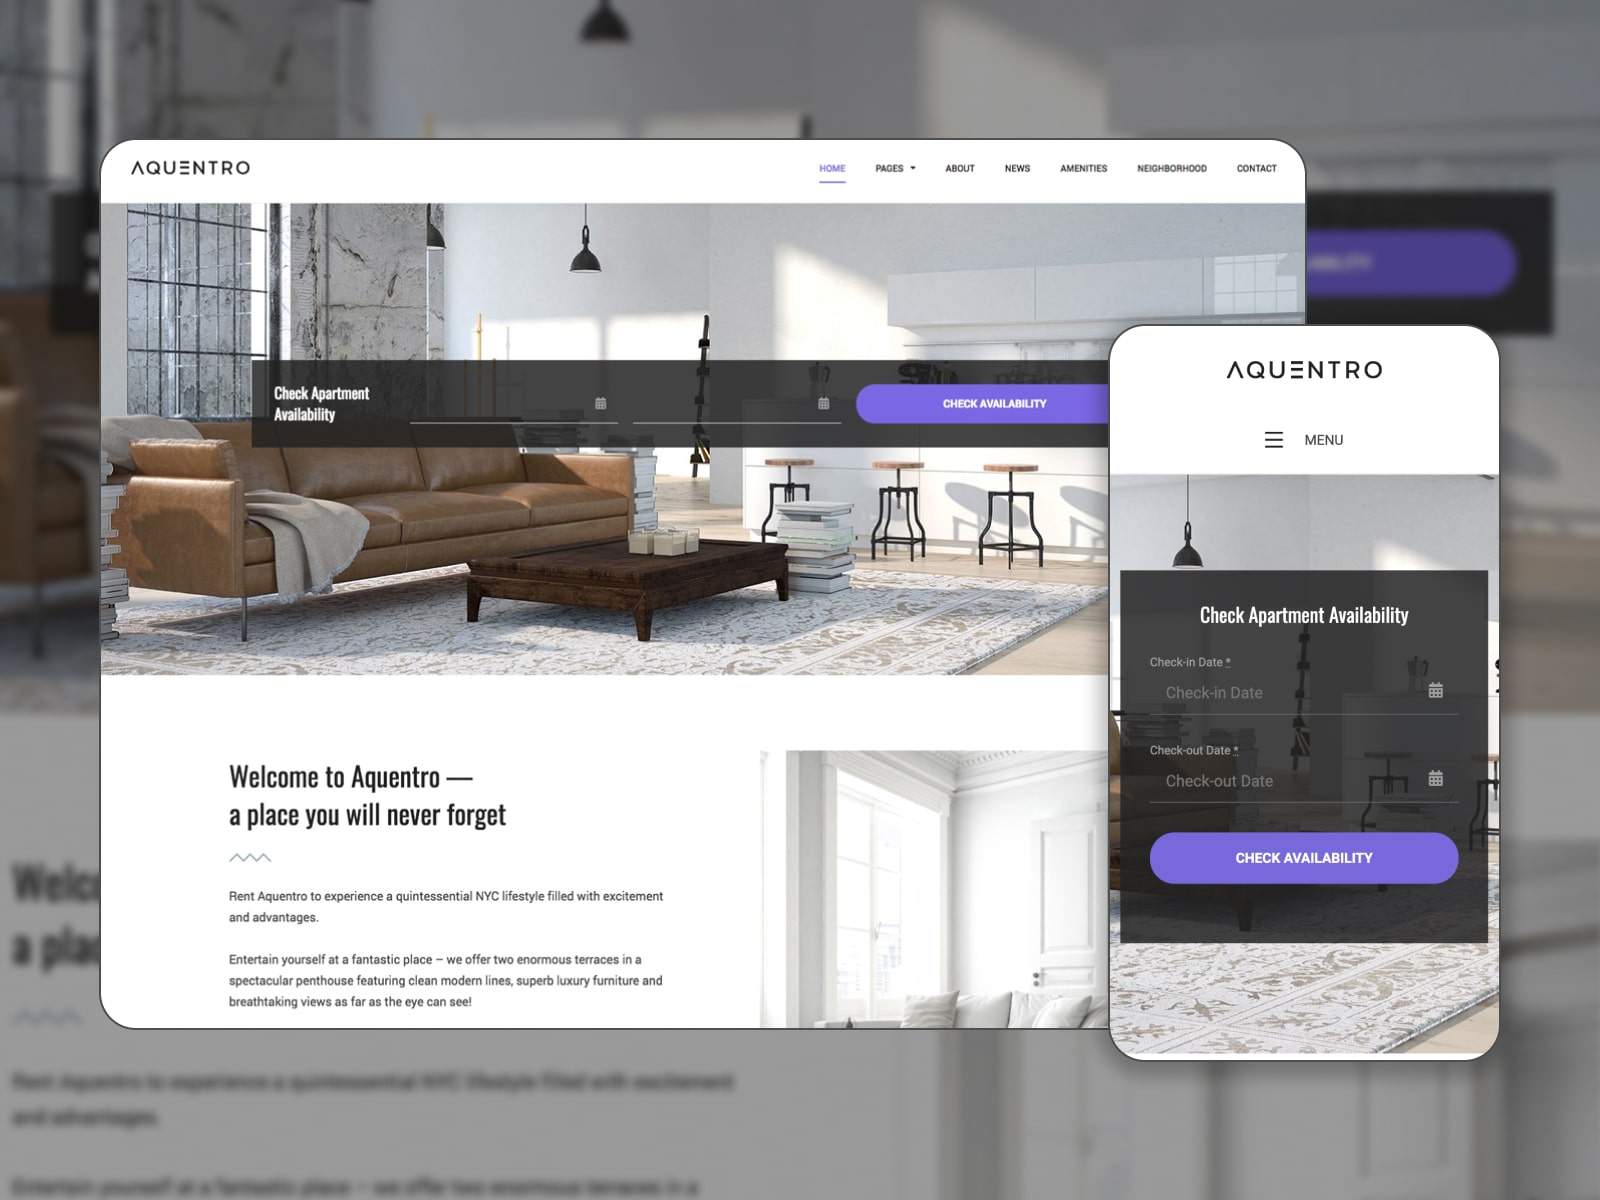 One of the best hotel website templates designed specifically for showcasing single apartments.